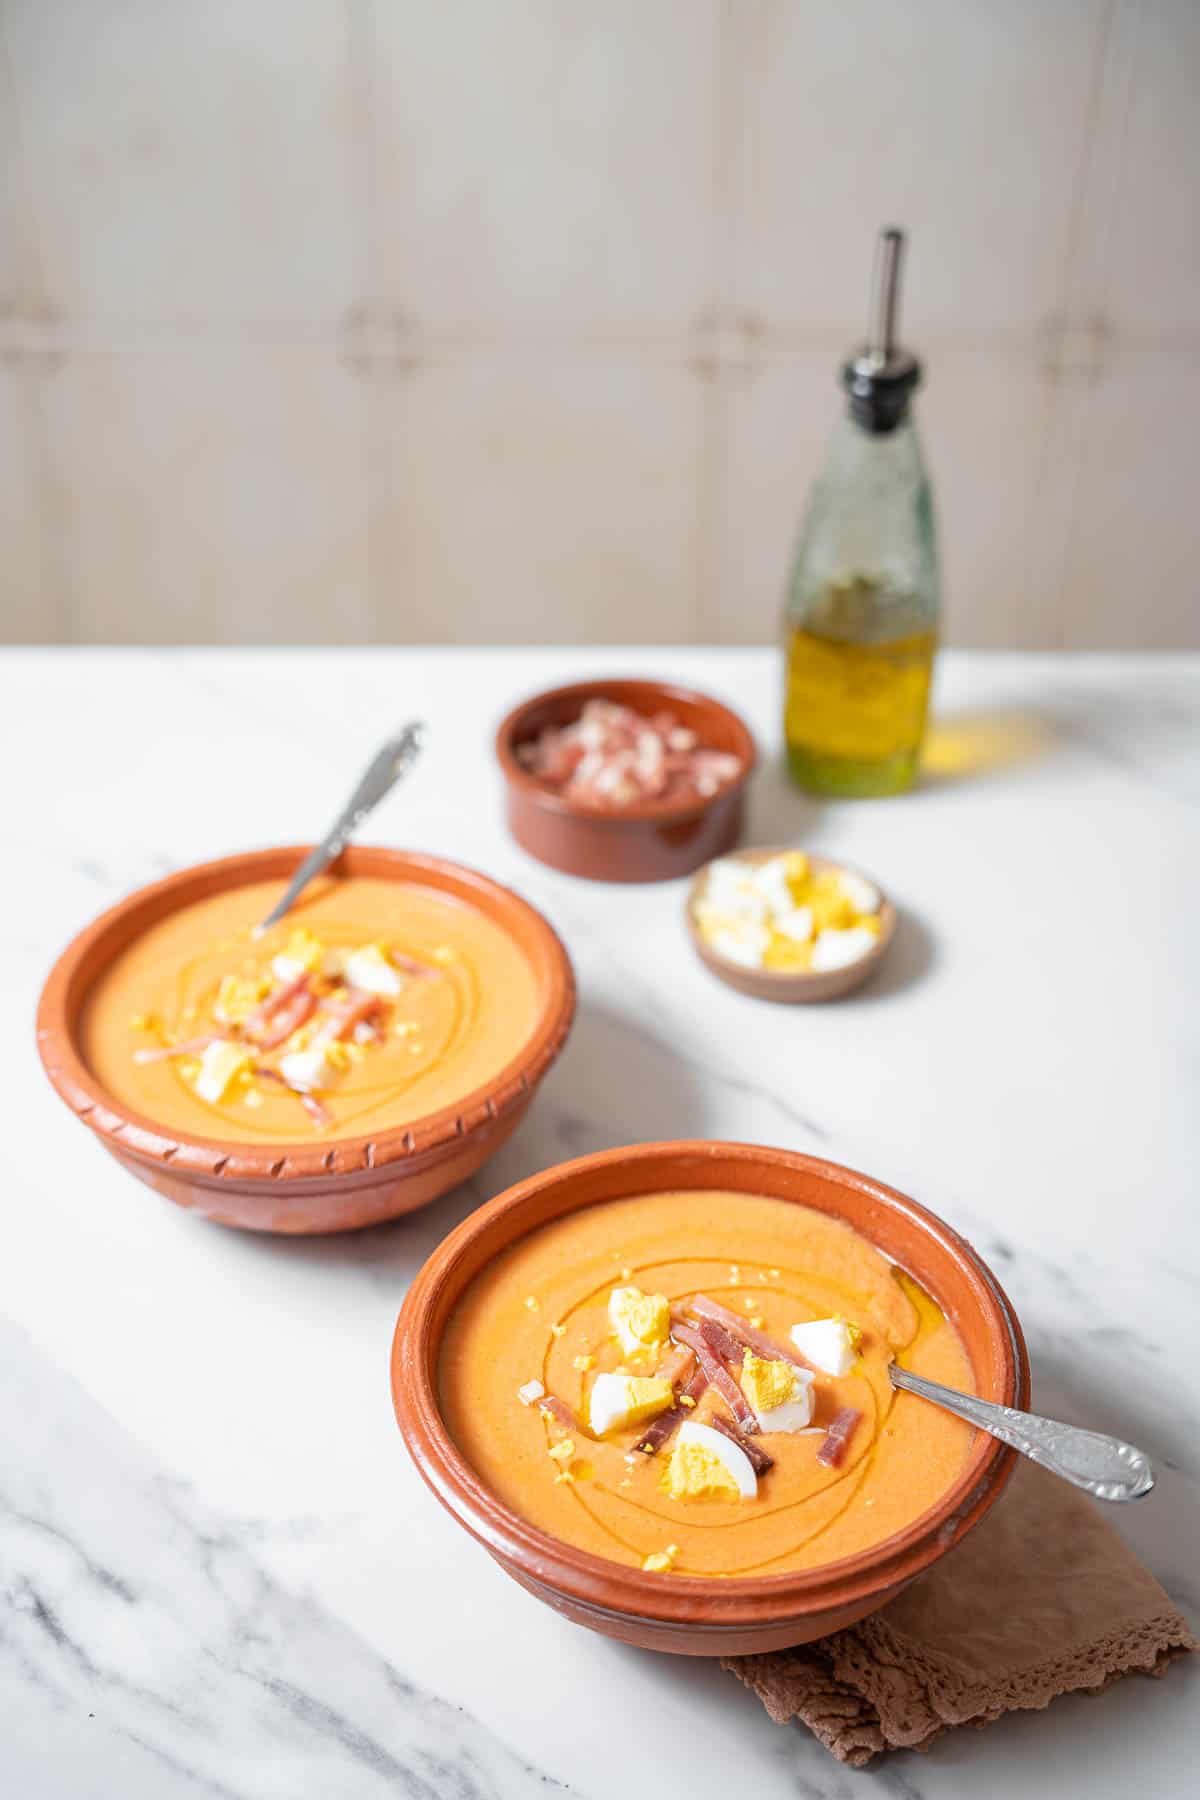 two bowls of salmorejo with a bottle of olive oil.